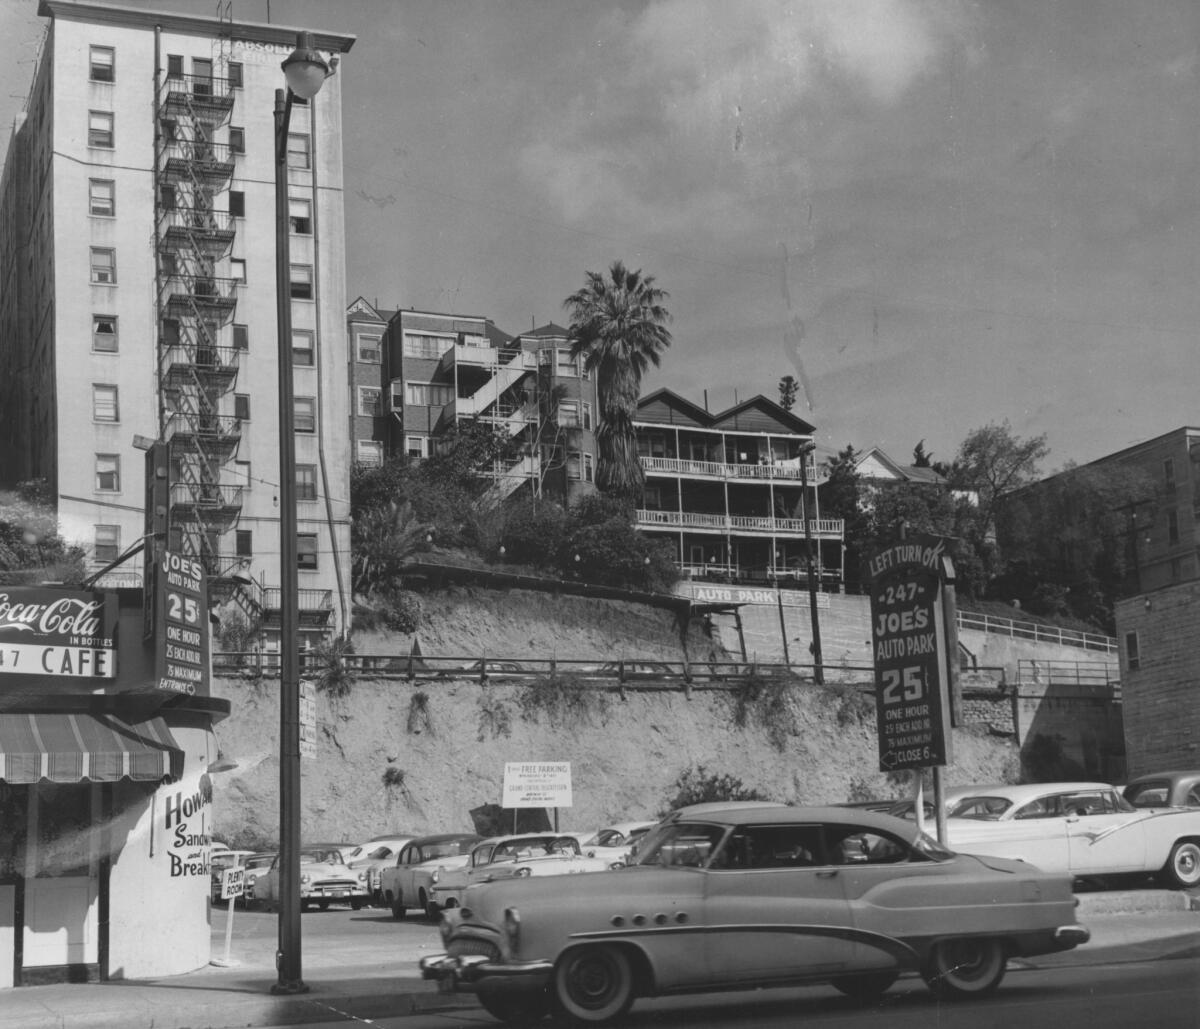 1950s: Cliffside hotels dot Bunker Hill. The city's Community Redevelopment Agency studied how to redevelop 135 acres of the Bunker Hill neighborhood "classified by local and federal authorities as a slum and substandard housing area," according to a Los Angeles Times report.